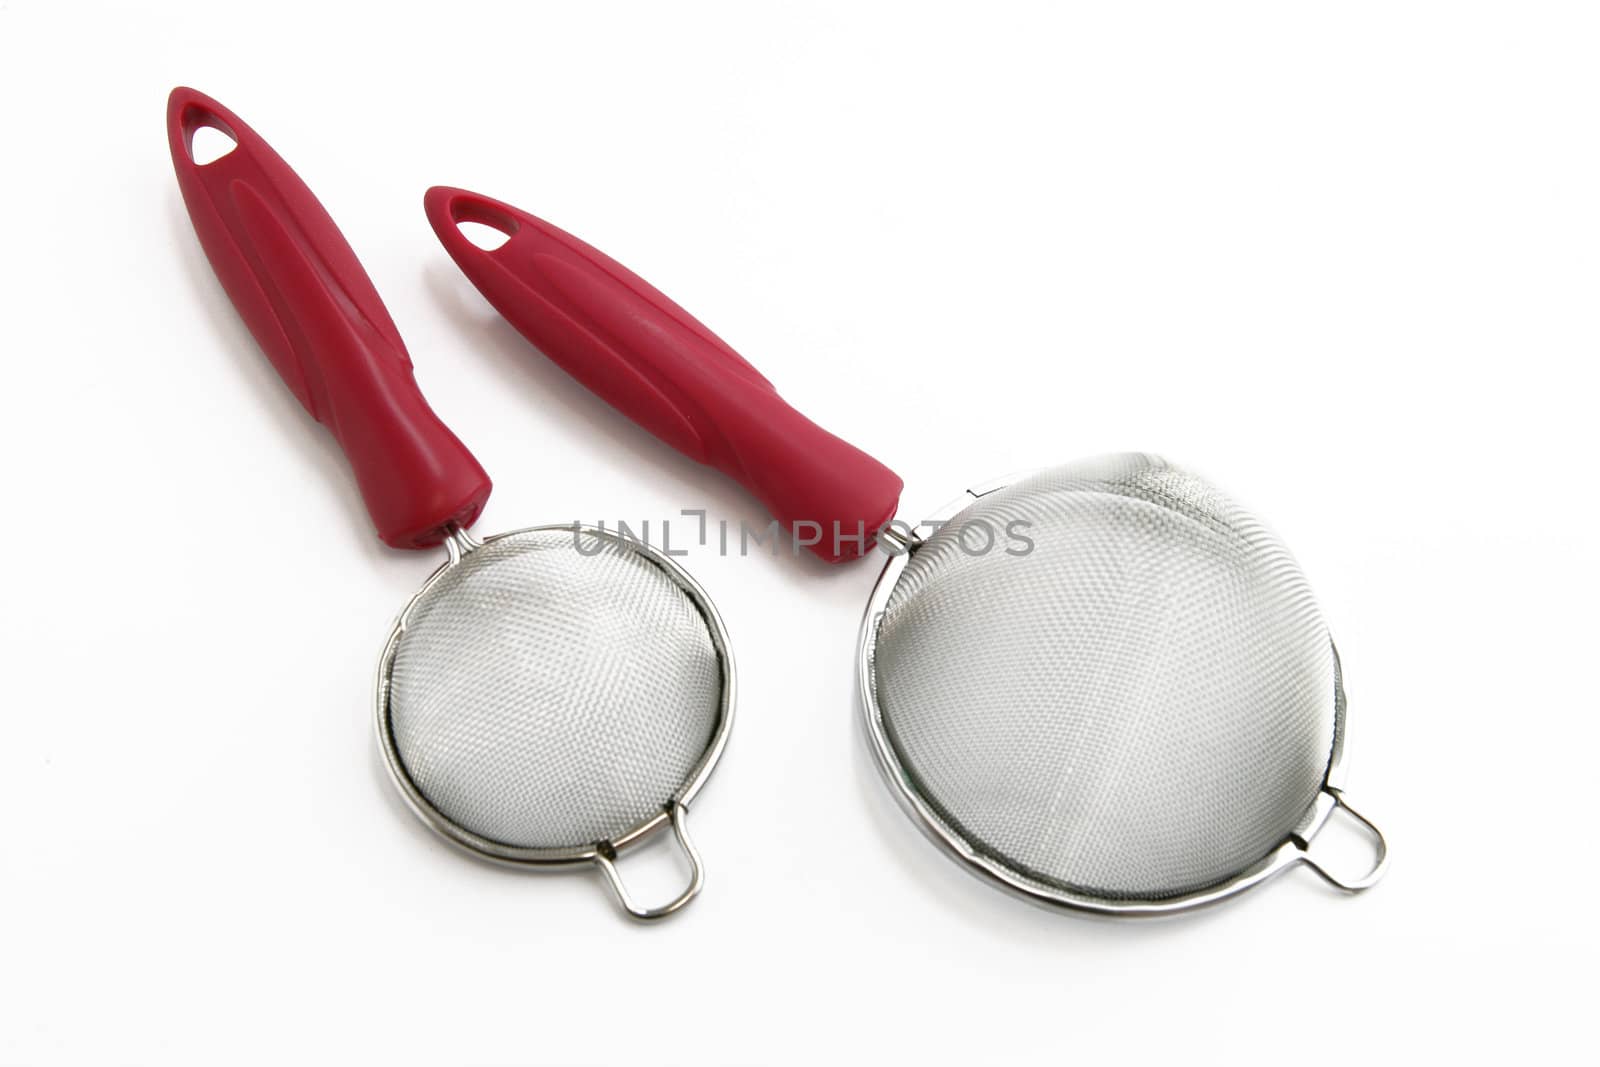 Two kitchen sieves by phovoir